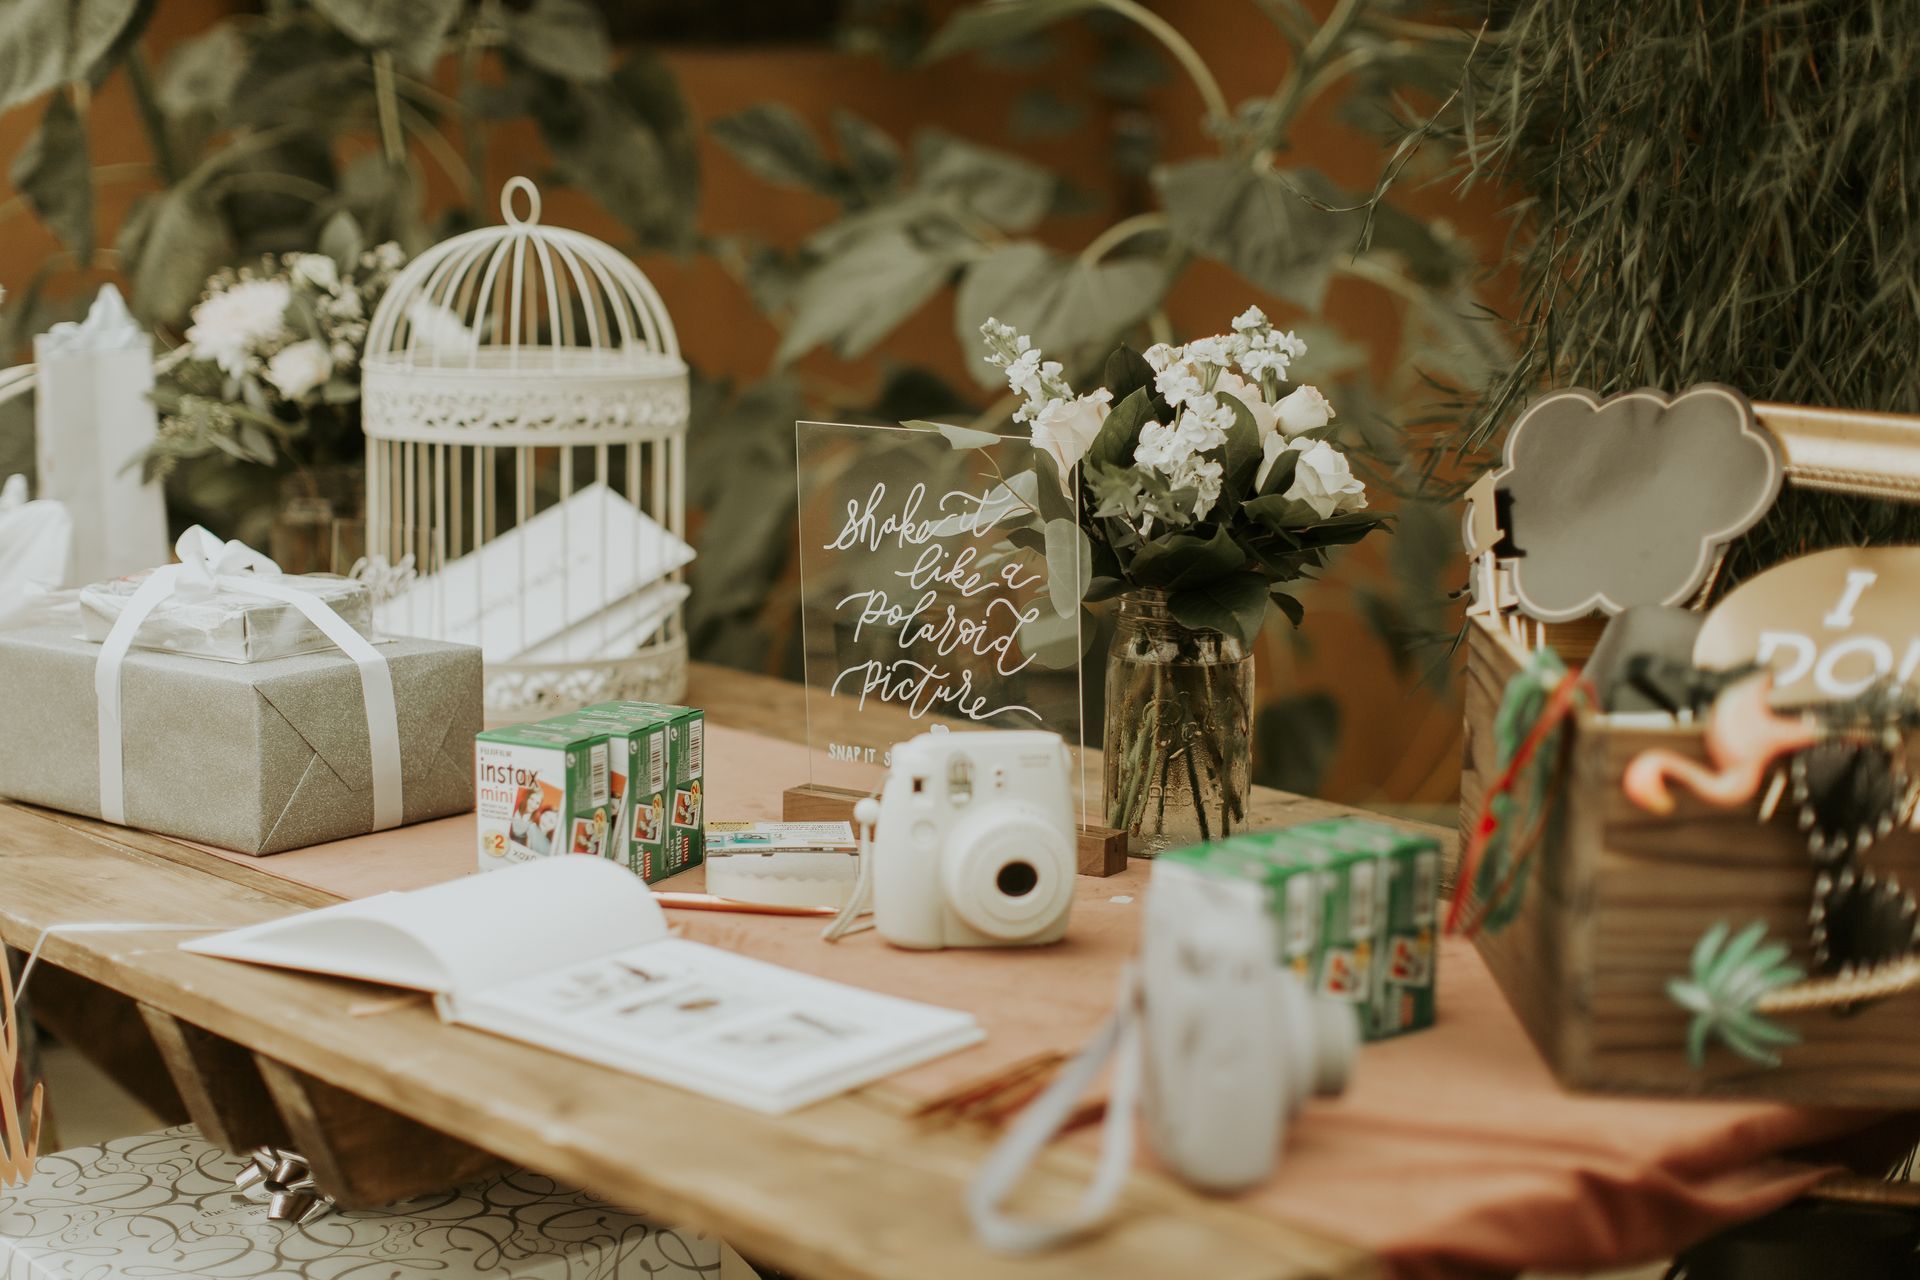 A wooden table topped with a book, a camera, a bird cage , and flowers.